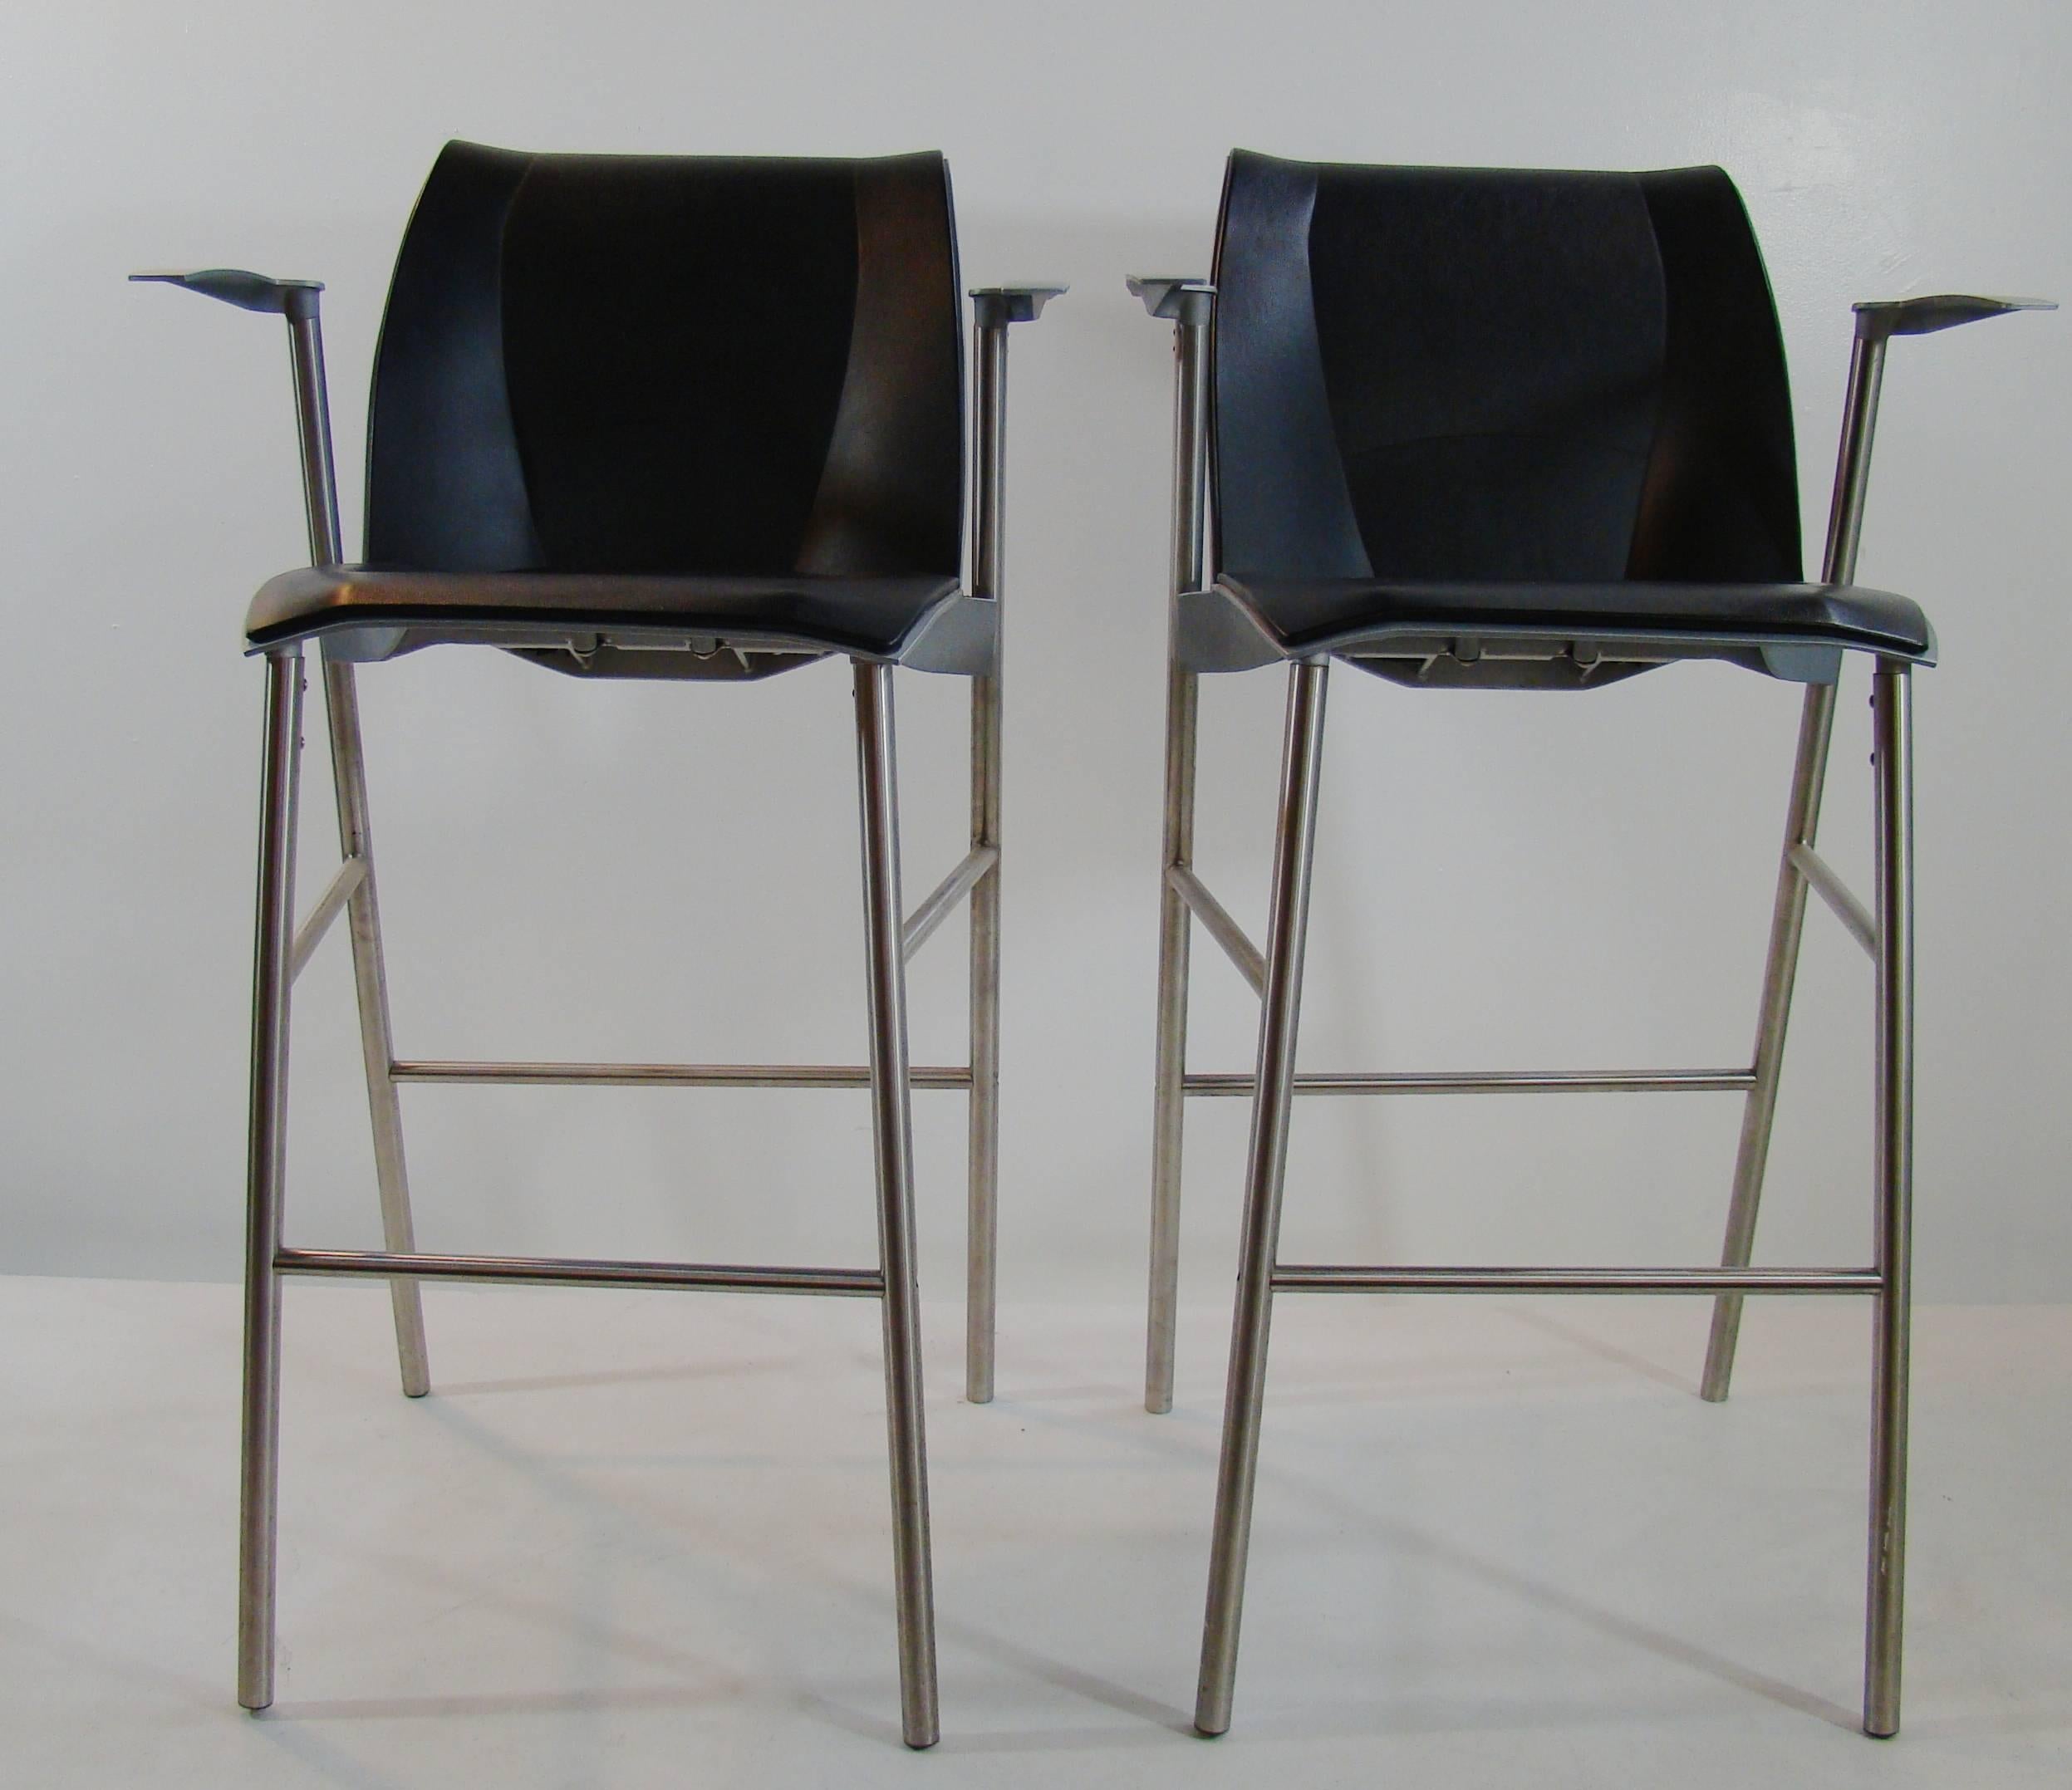 Frank Gehry for Knoll Studio Limited Edition Fog Bar Stools In Excellent Condition For Sale In Denver, CO